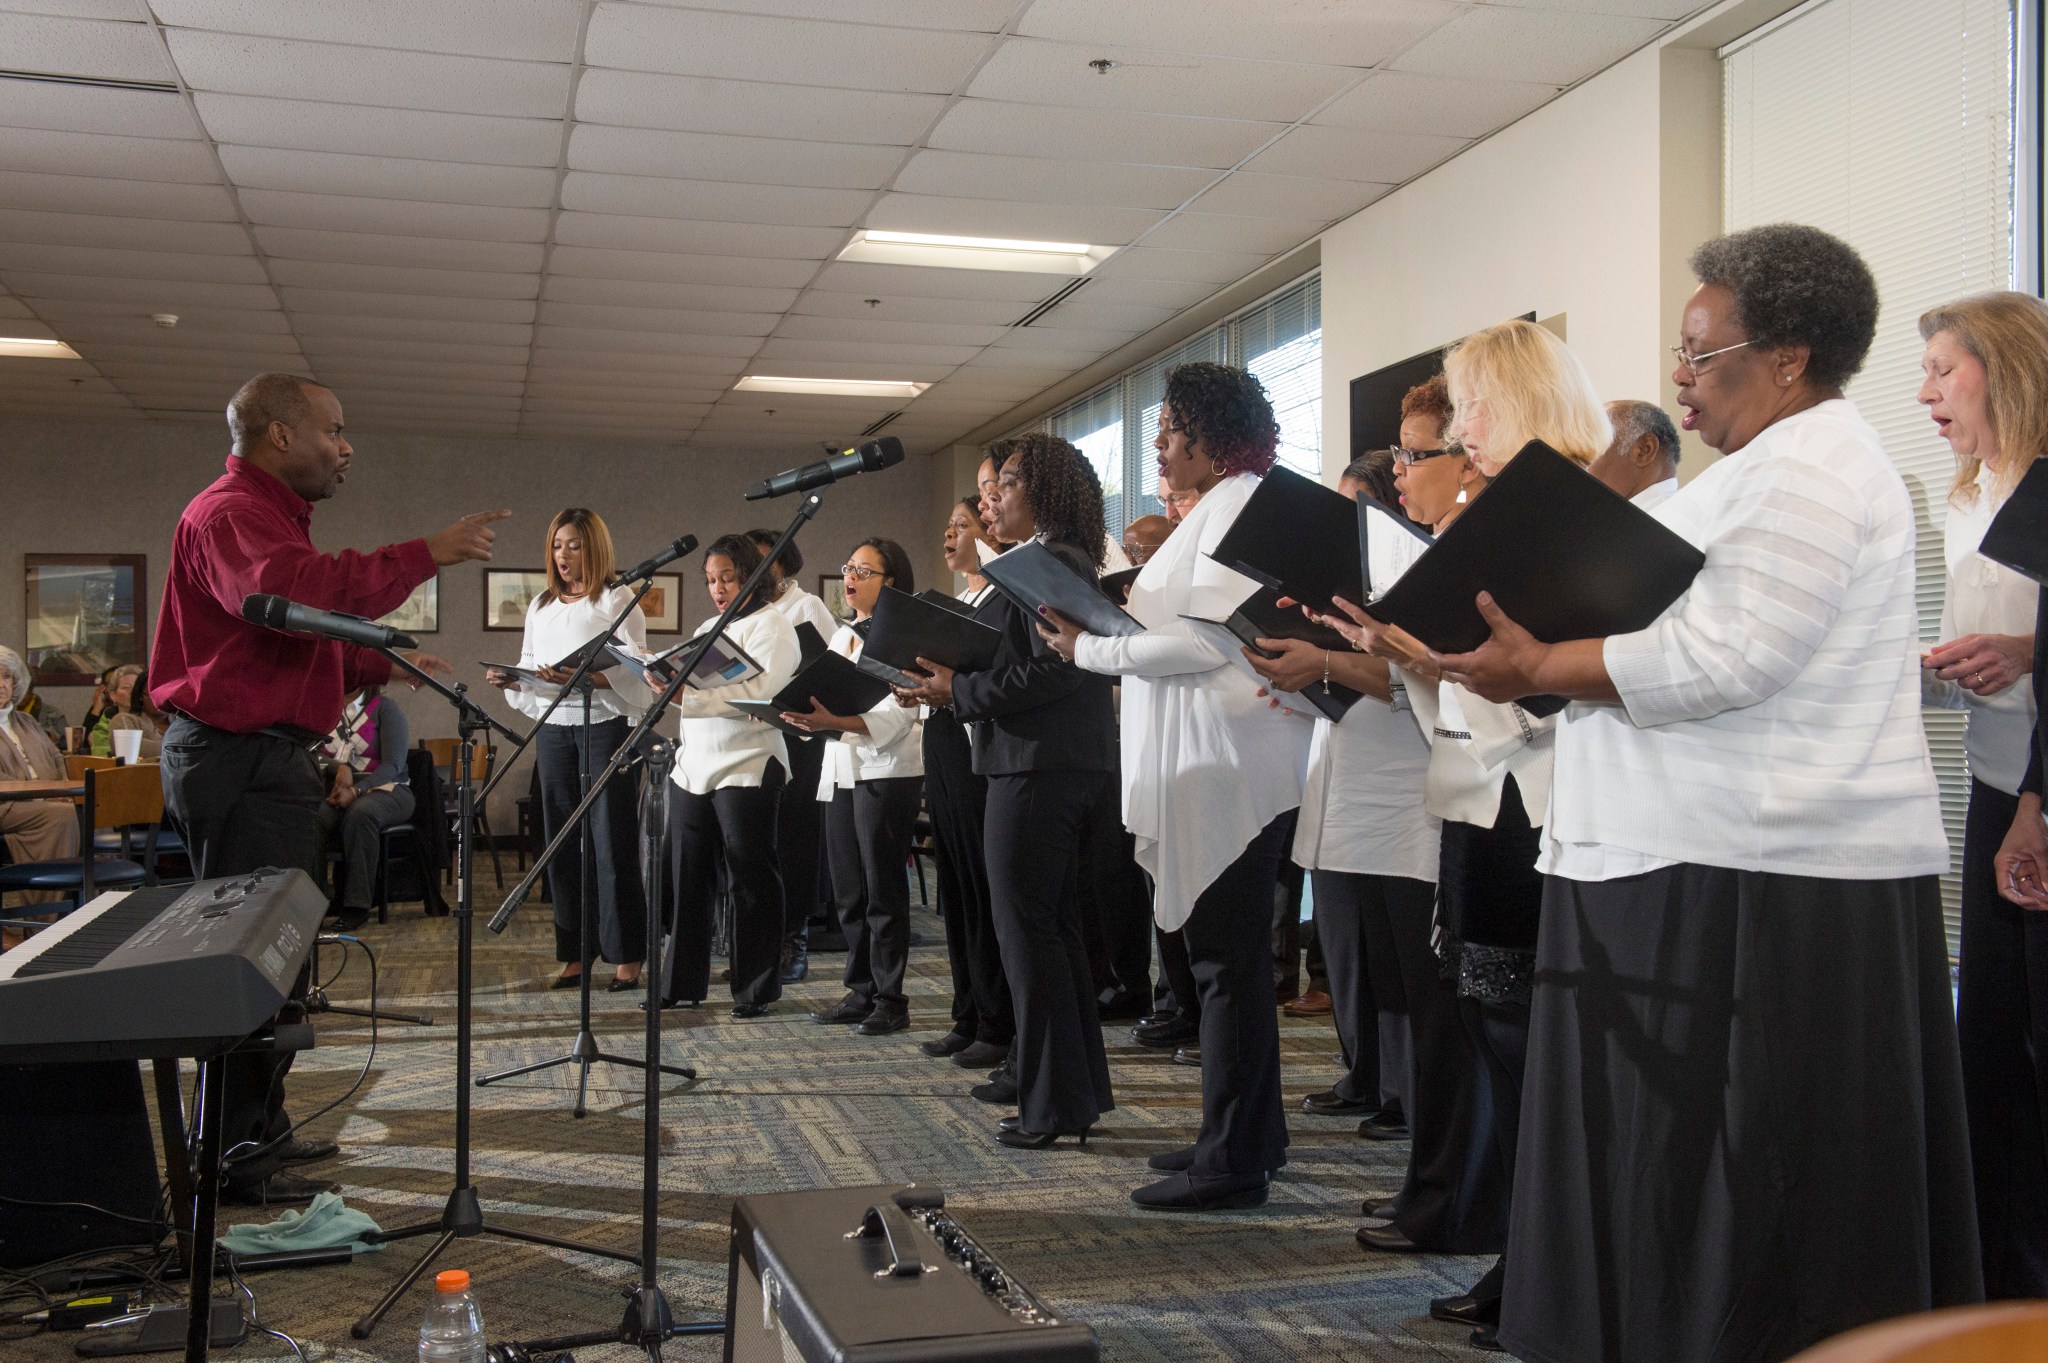 Marshall engineer Kim Jones, left, leads the Voices of Marshall Chorus in song Feb. 11 in the Building 4203 cafeteria.